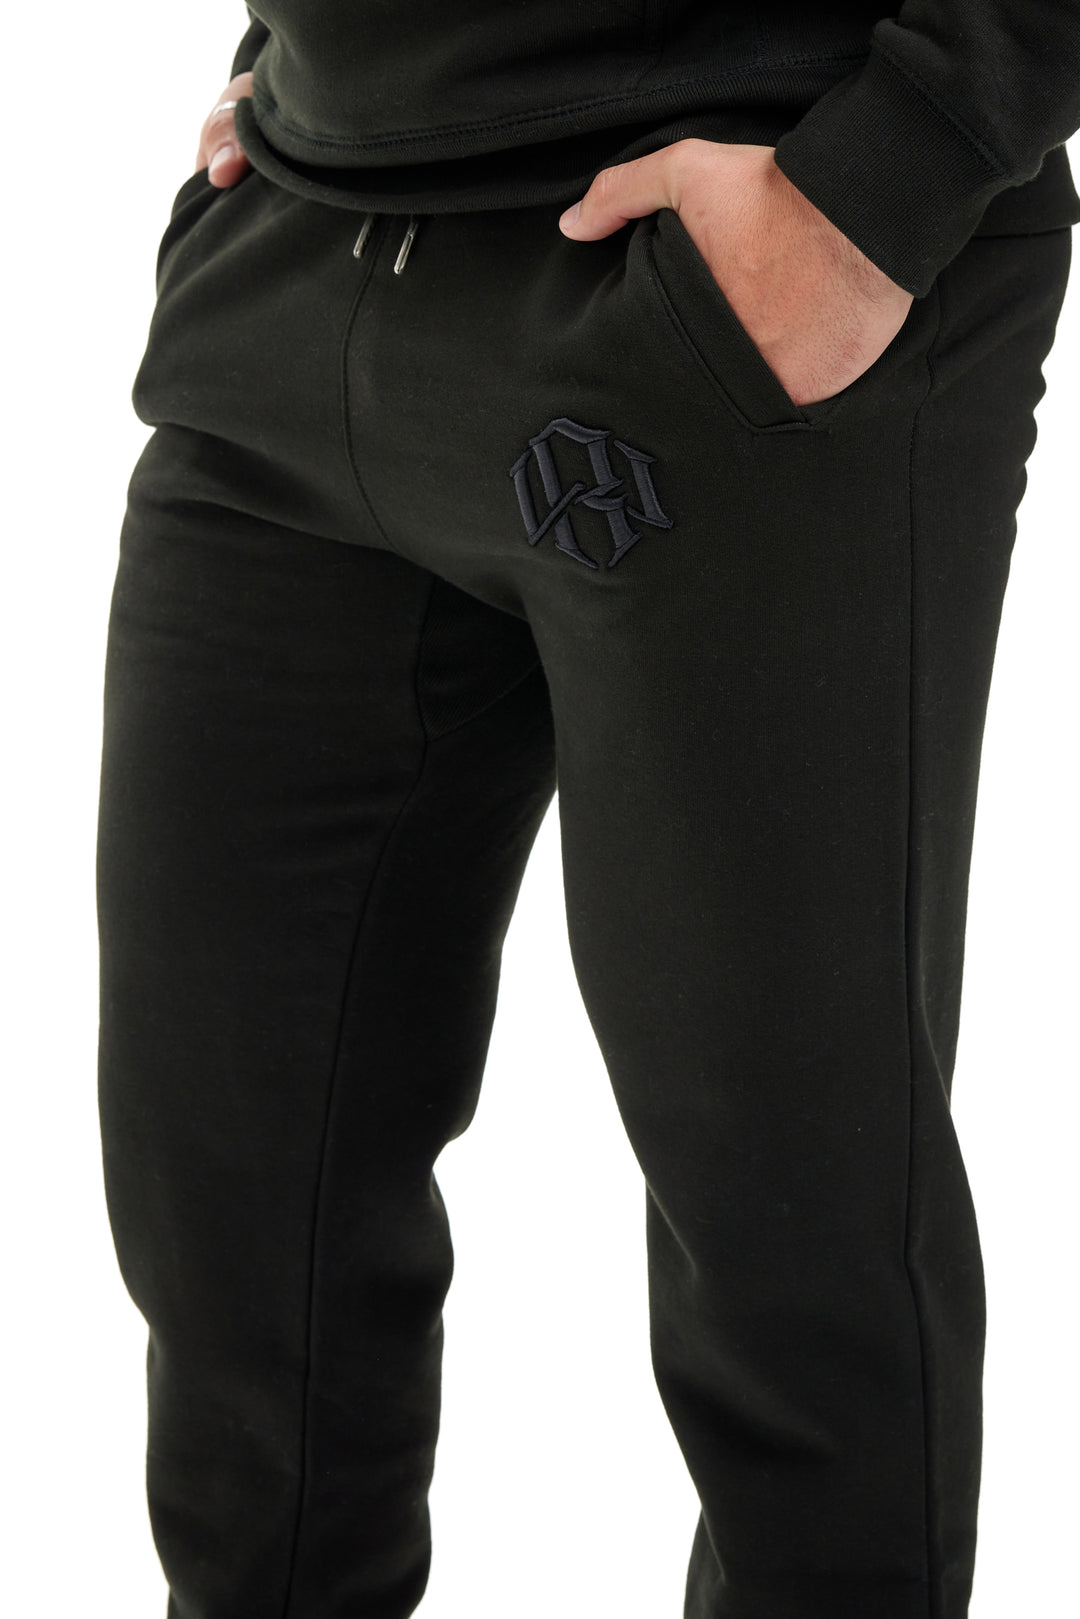 Model wearing Black Sweatpants by RENOWNED WEAR brand with hands in the pockets.